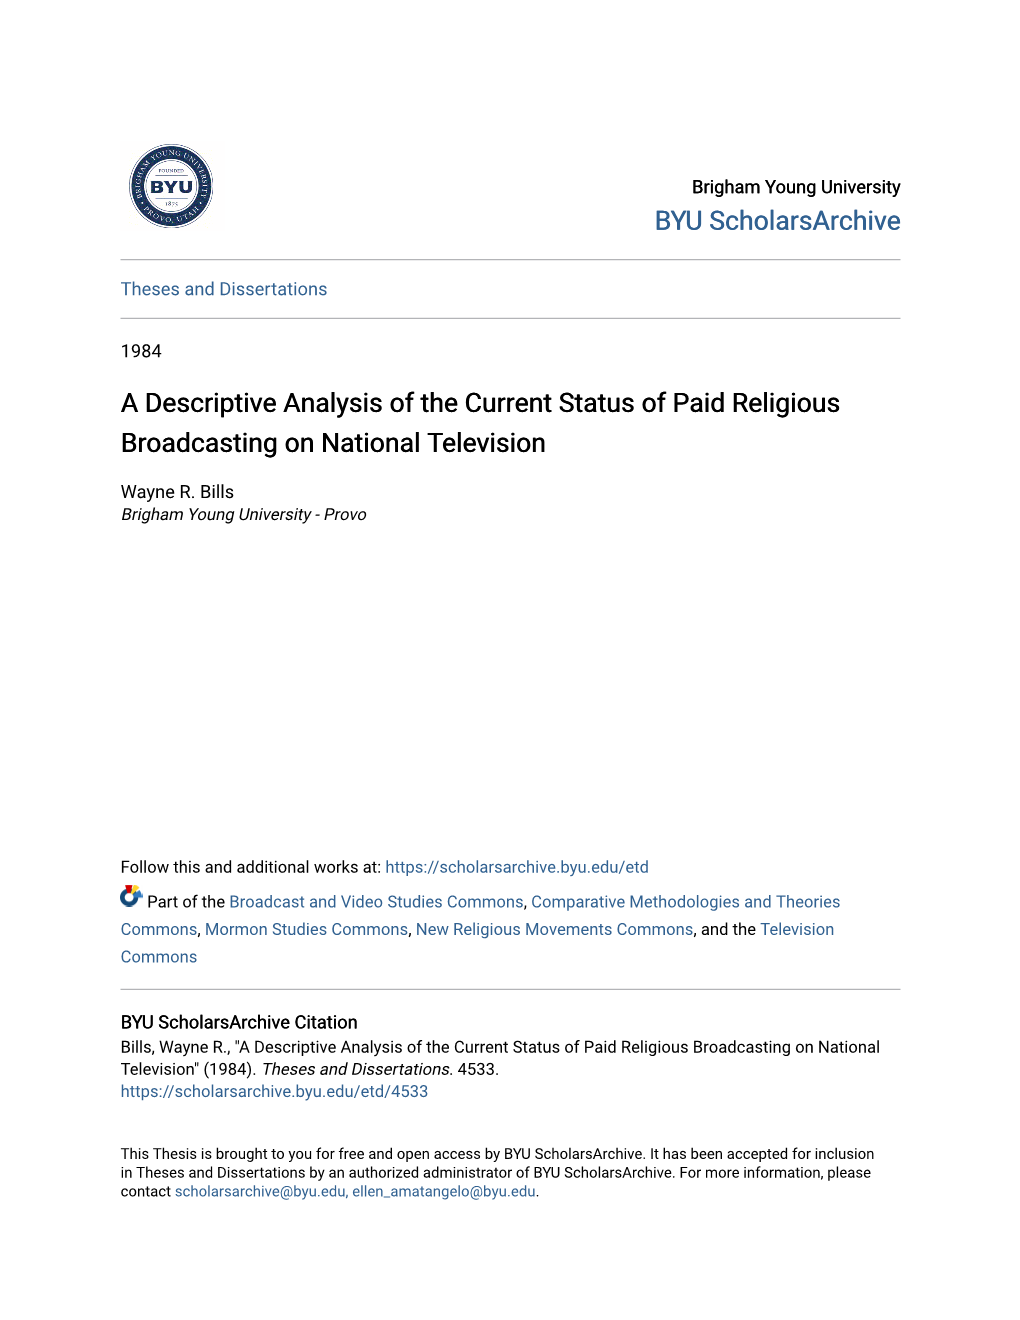 A Descriptive Analysis of the Current Status of Paid Religious Broadcasting on National Television